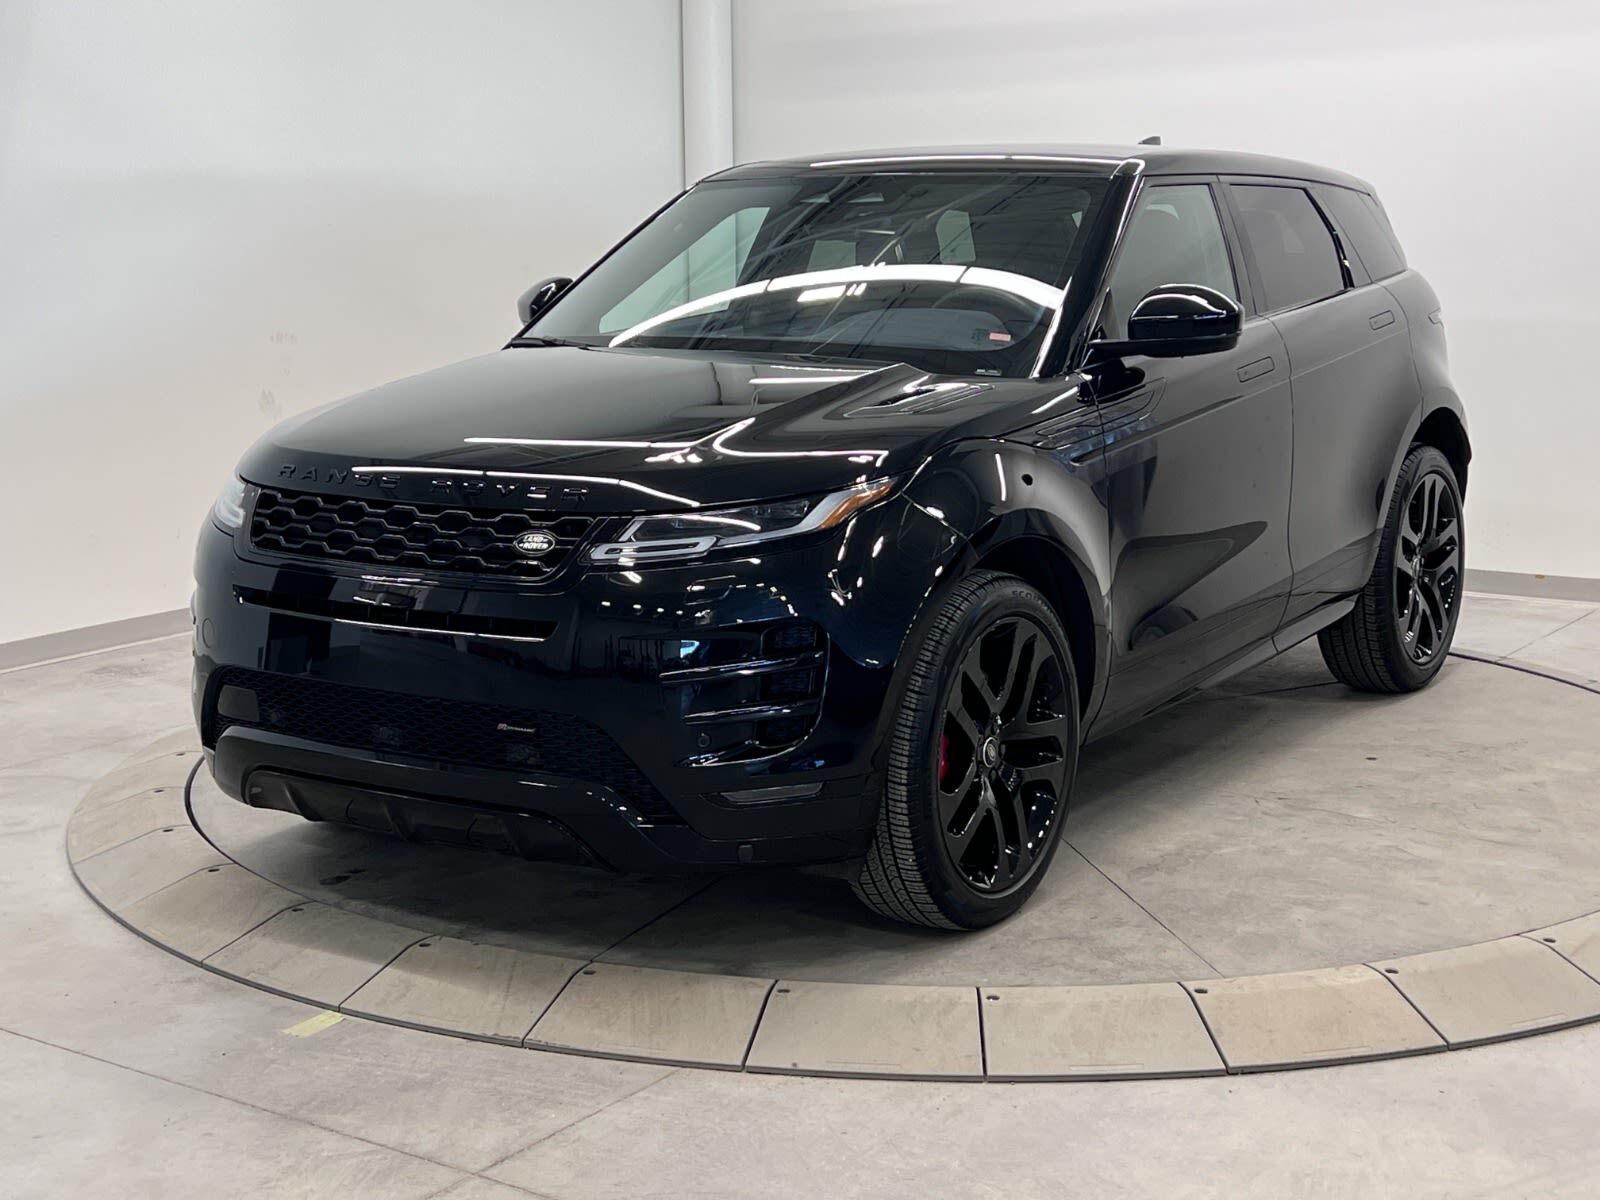 2023 Land Rover Range Rover Evoque CERTIFIED PRE OWNED RATES AS LOW AS 5.99%